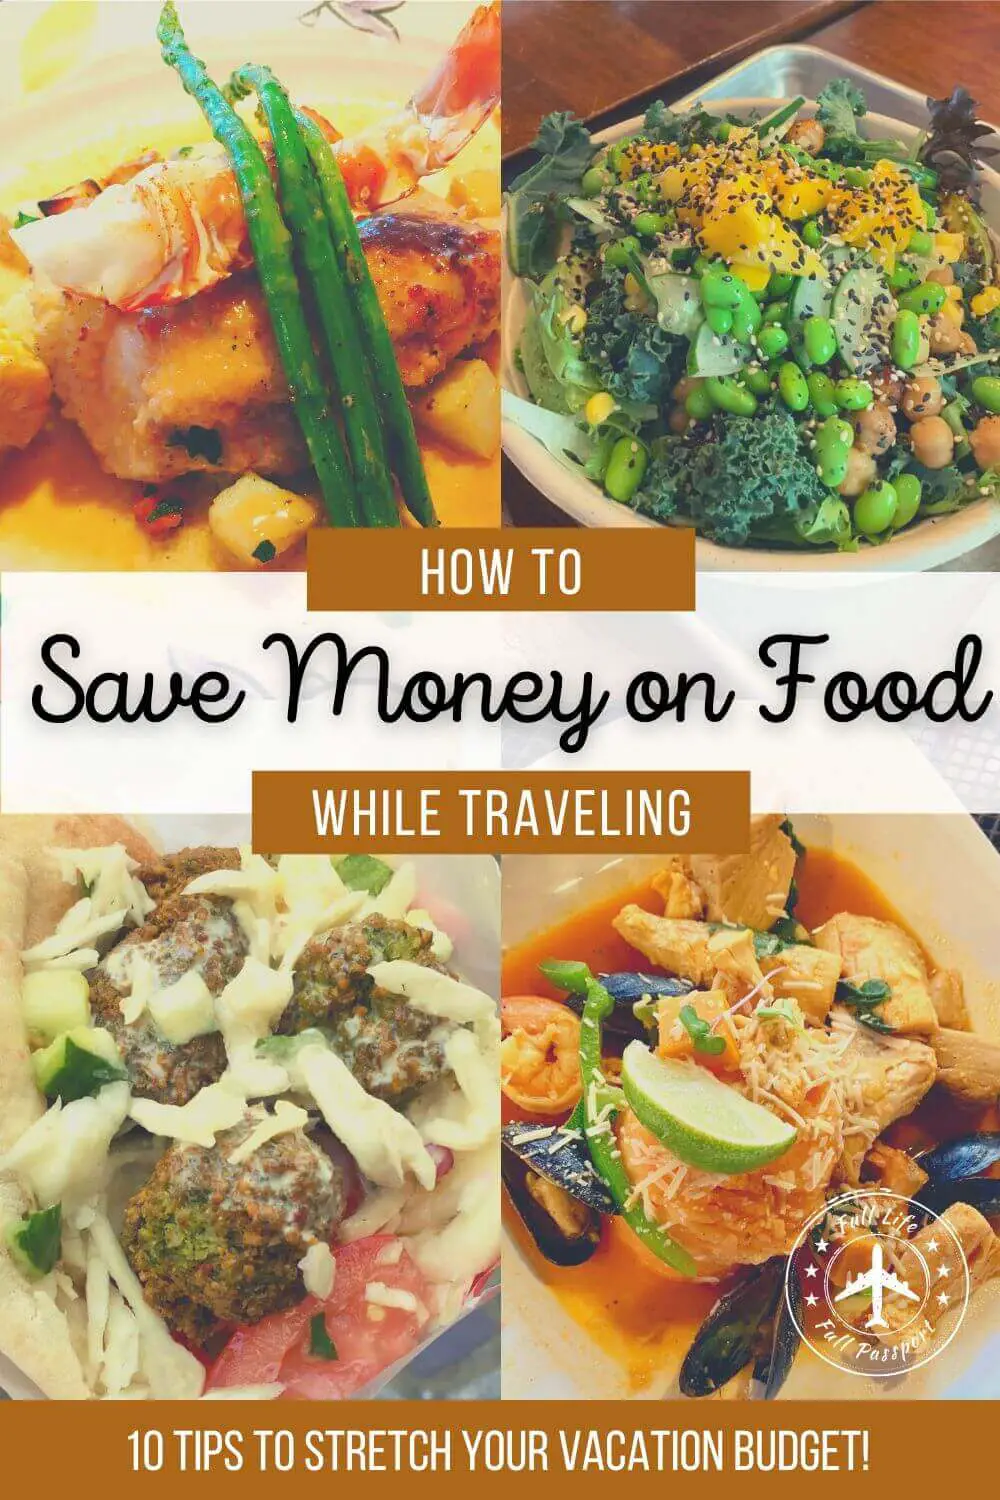 How to Save Money on Food While Traveling